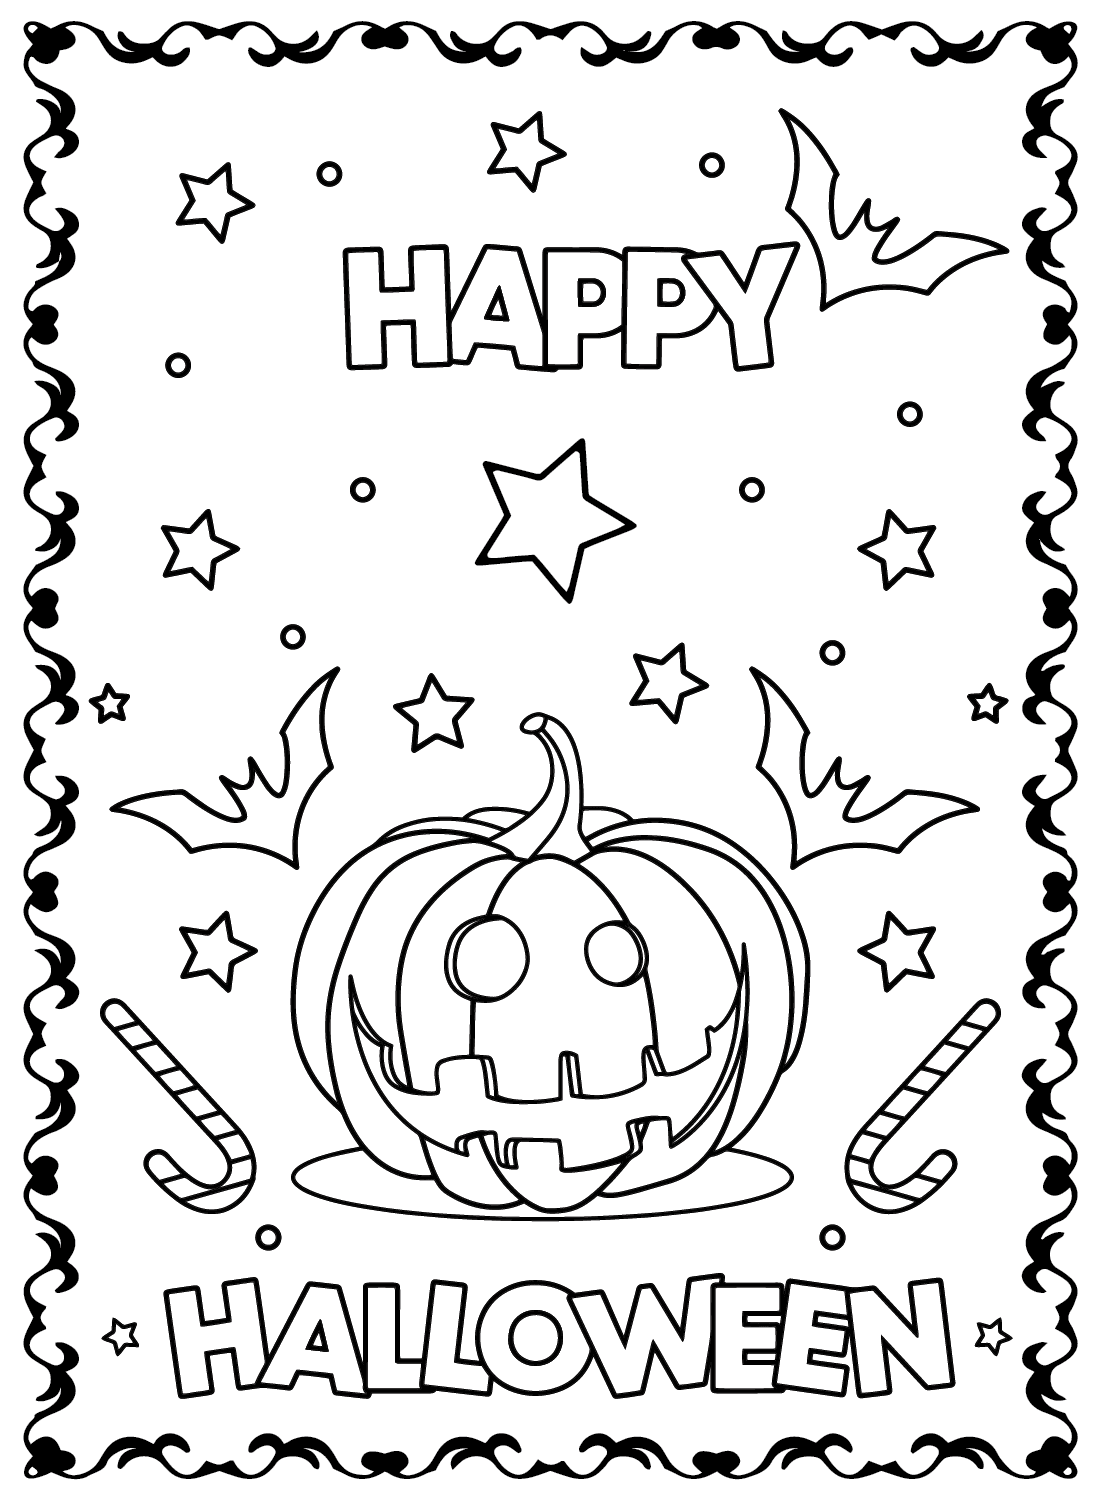 Halloween Cards Images to Color - Free Printable Coloring Pages